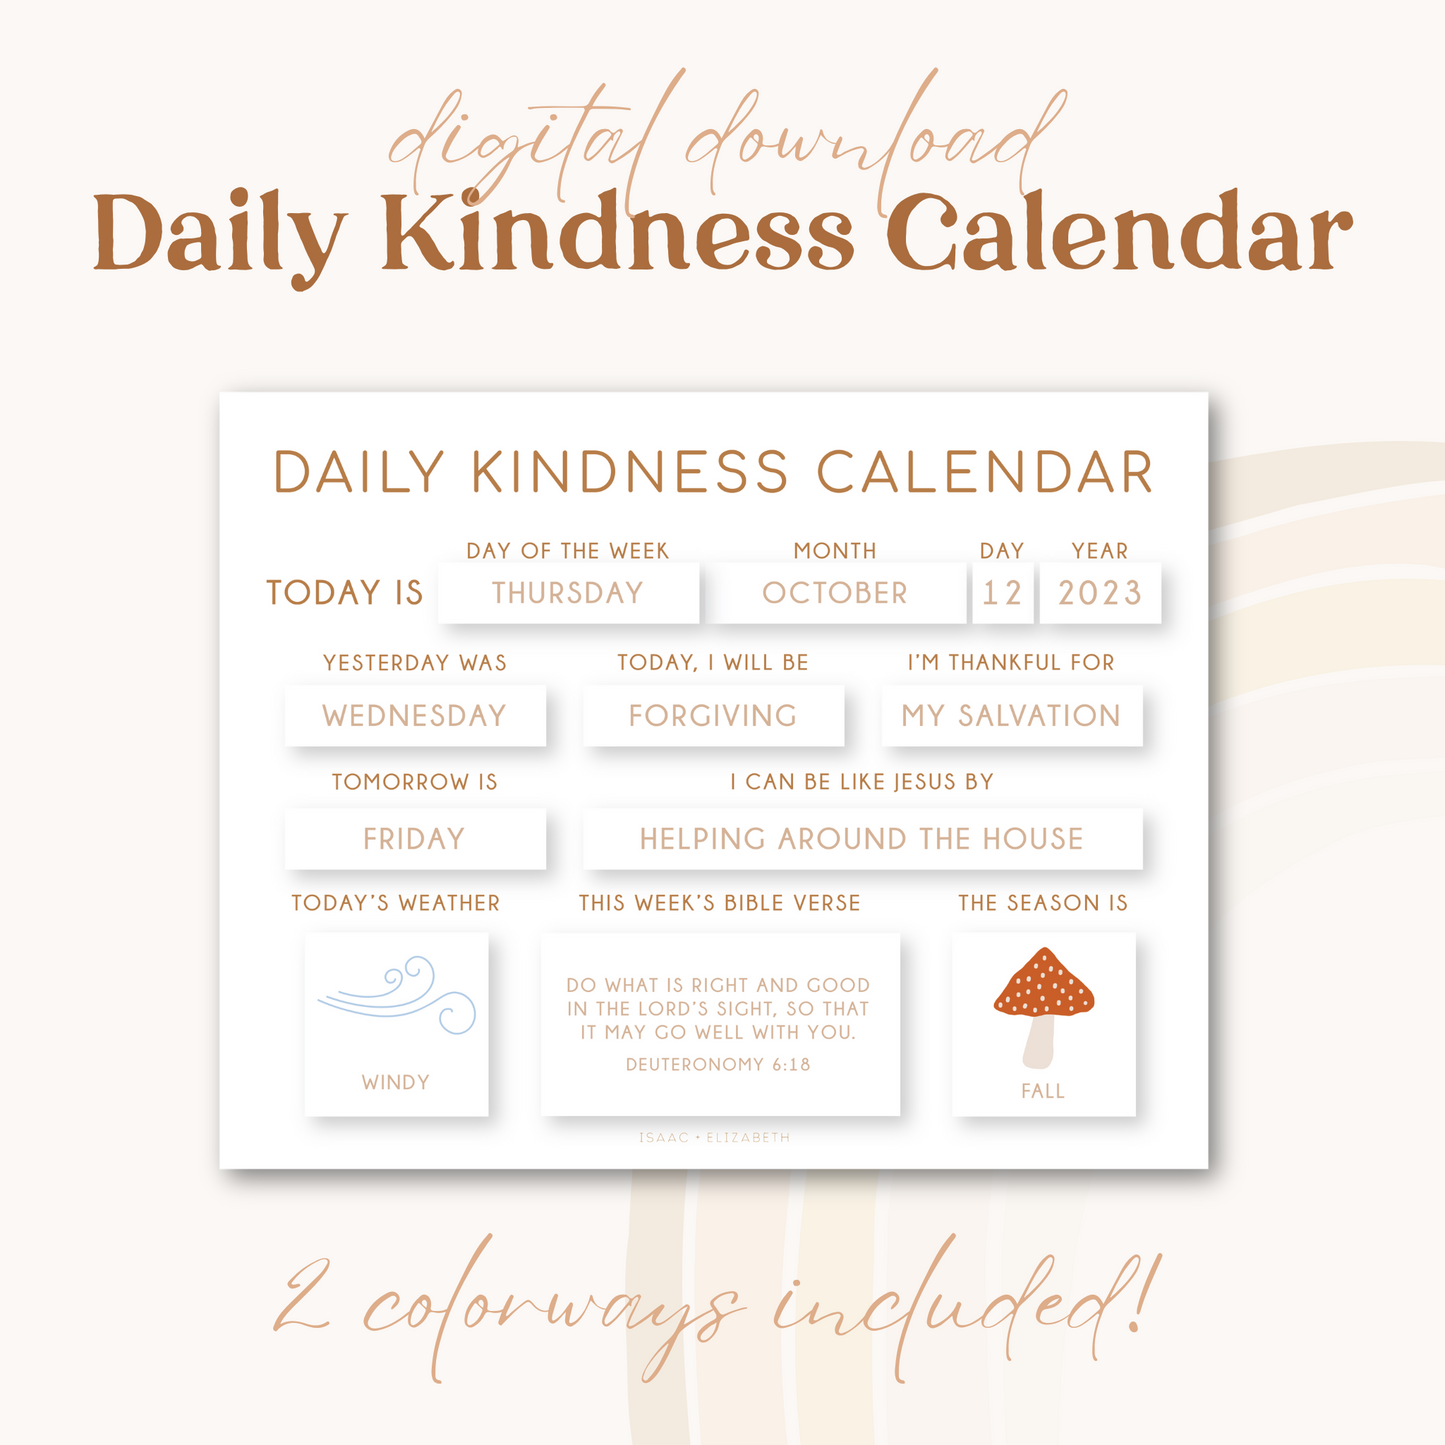 Daily Kindness Calendar | Digital Download | 2 Colorways | Black and White + Neutral